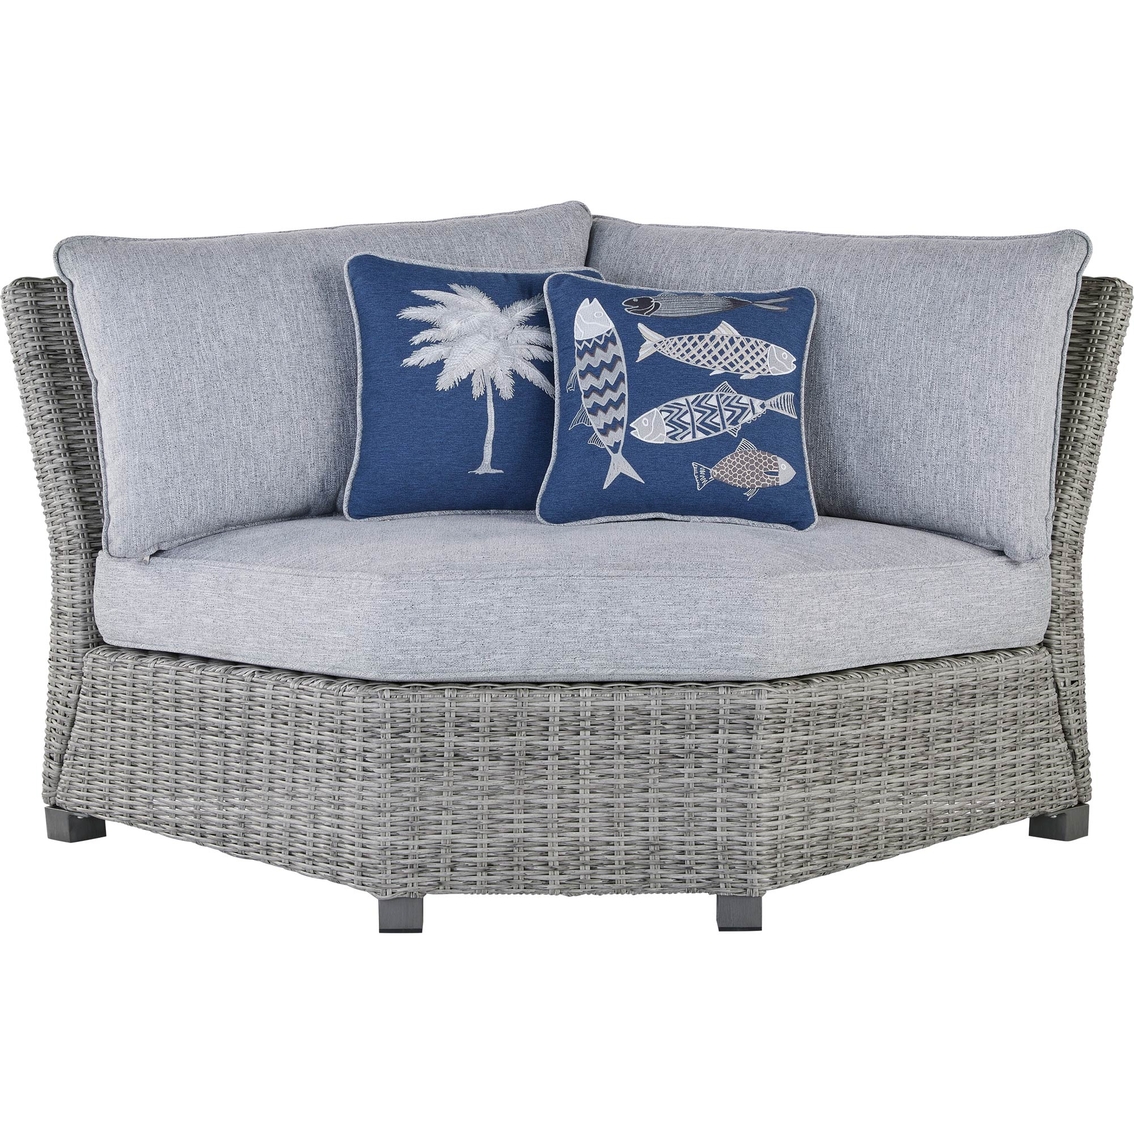 Signature Design by Ashley Naples Beach Outdoor 3 pc. Sectional - Image 3 of 10